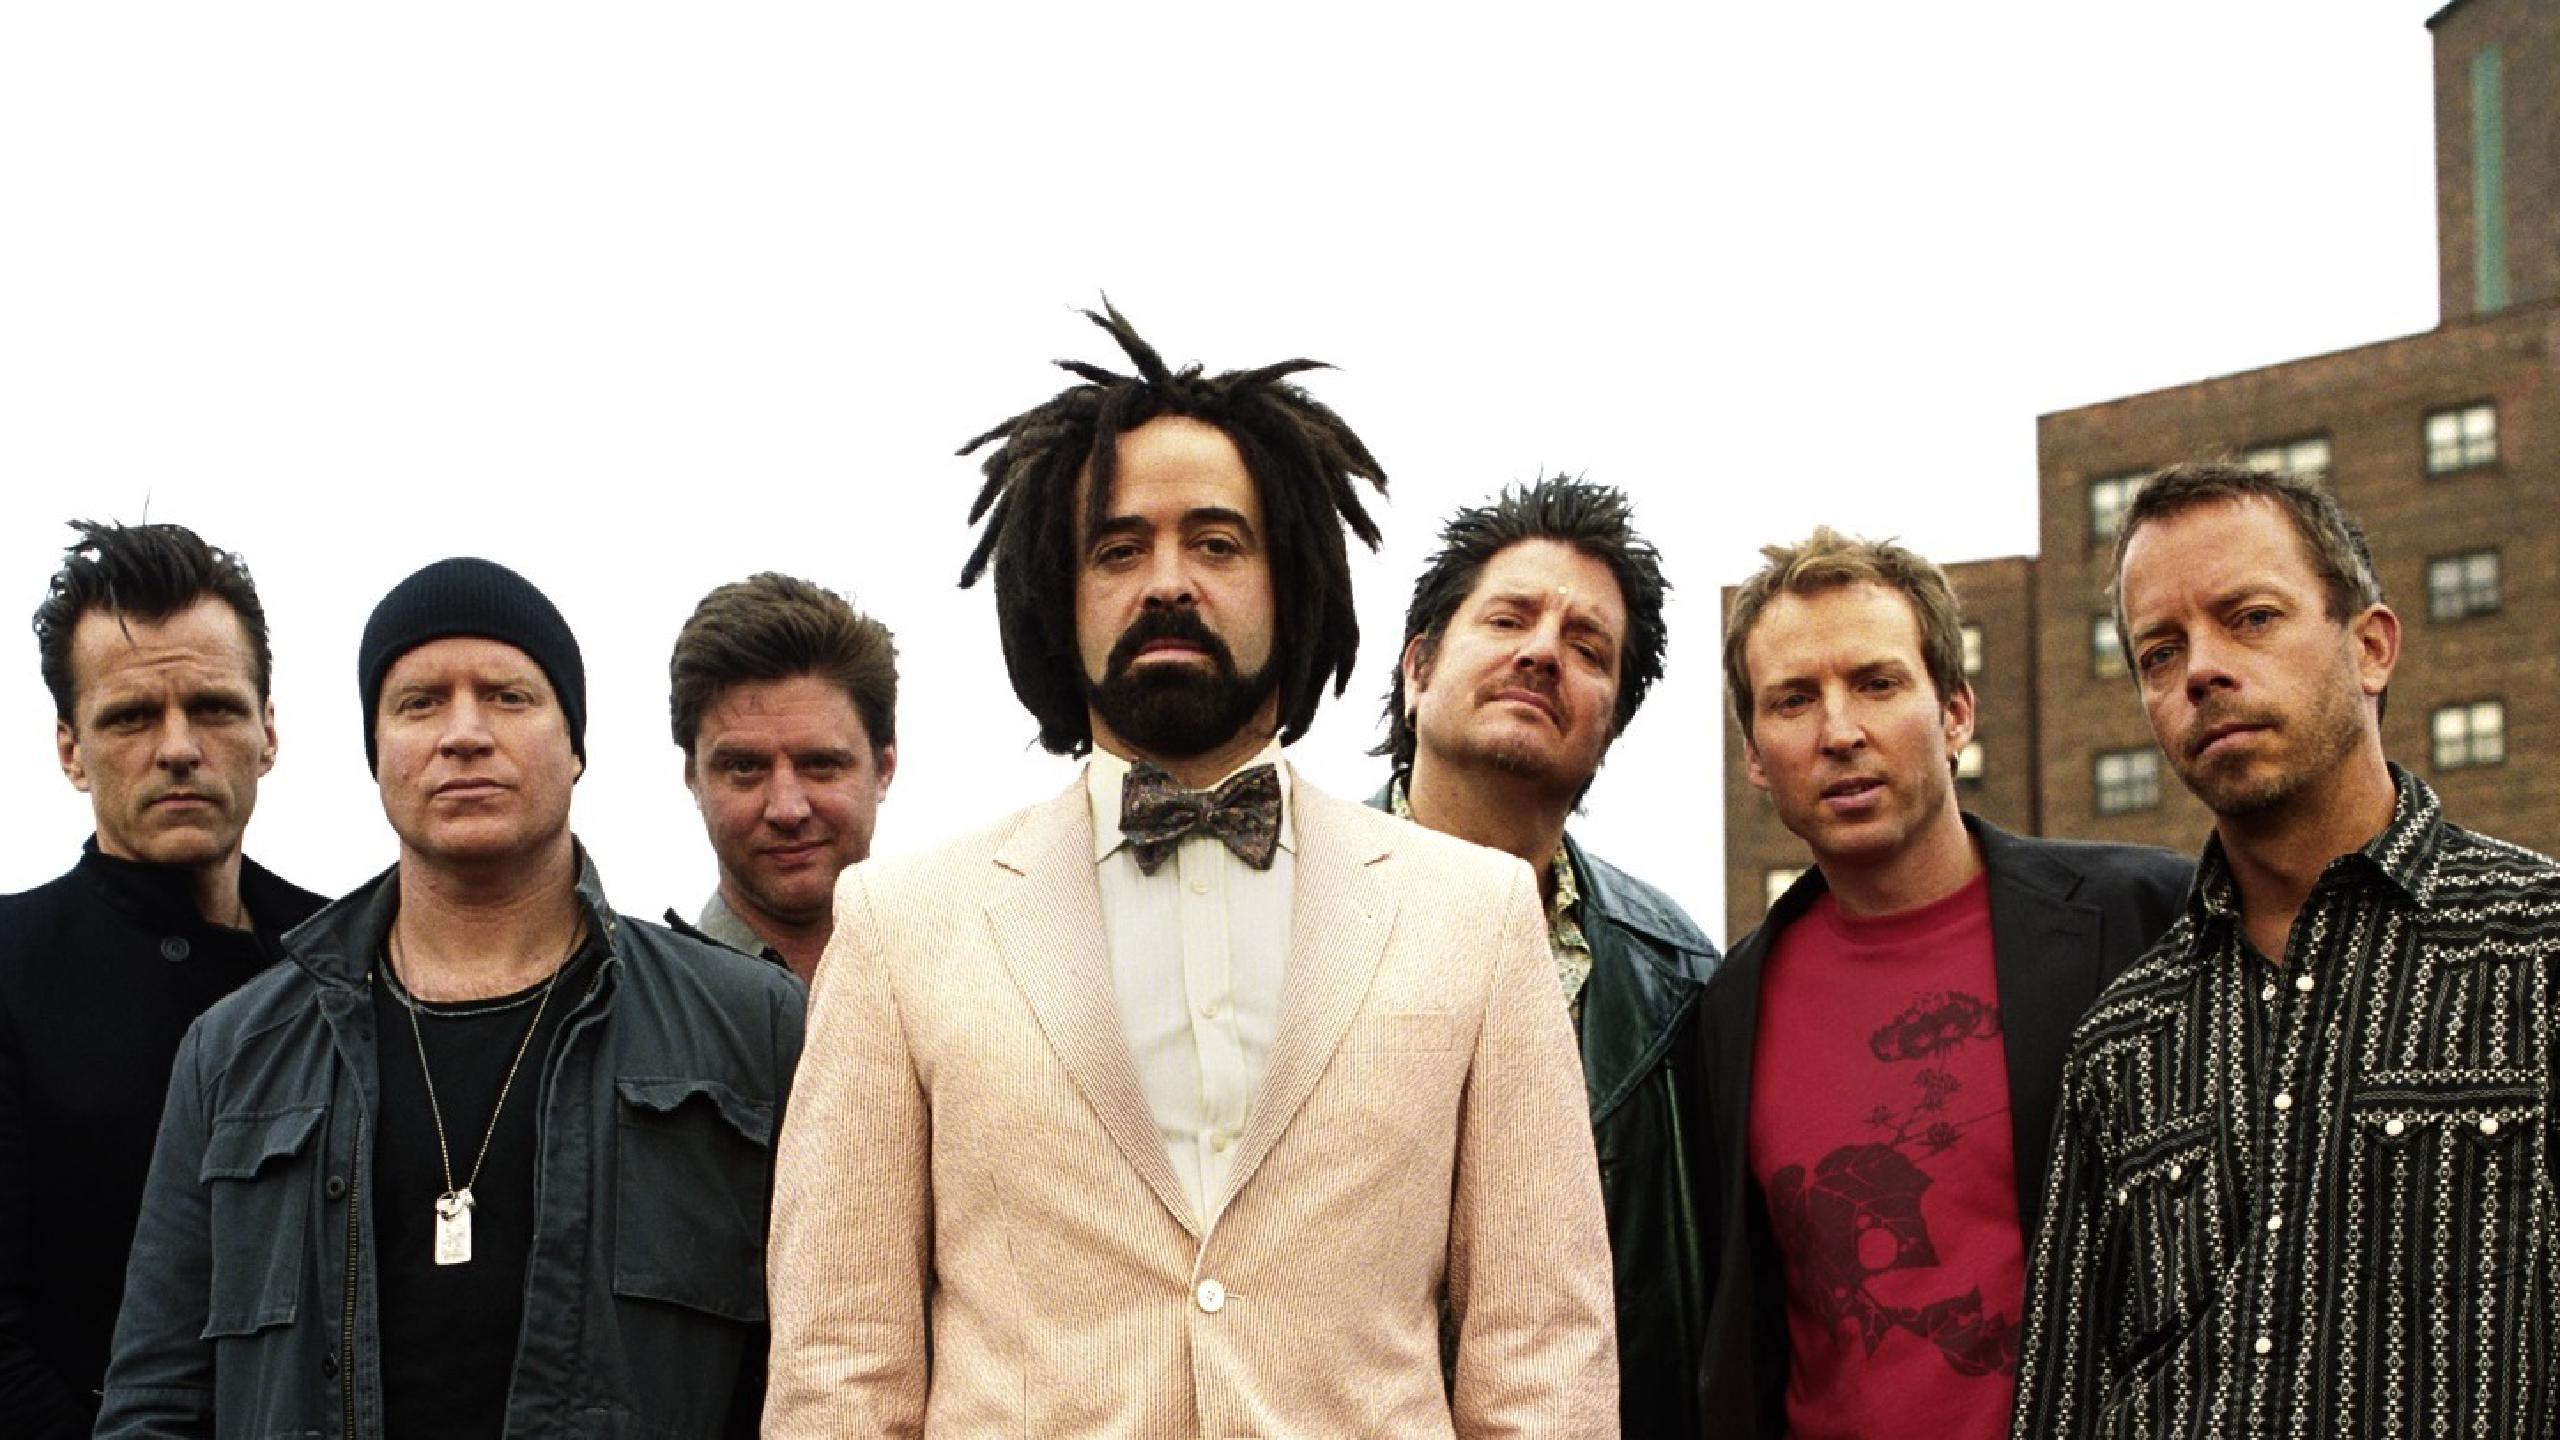 counting crows tour united states